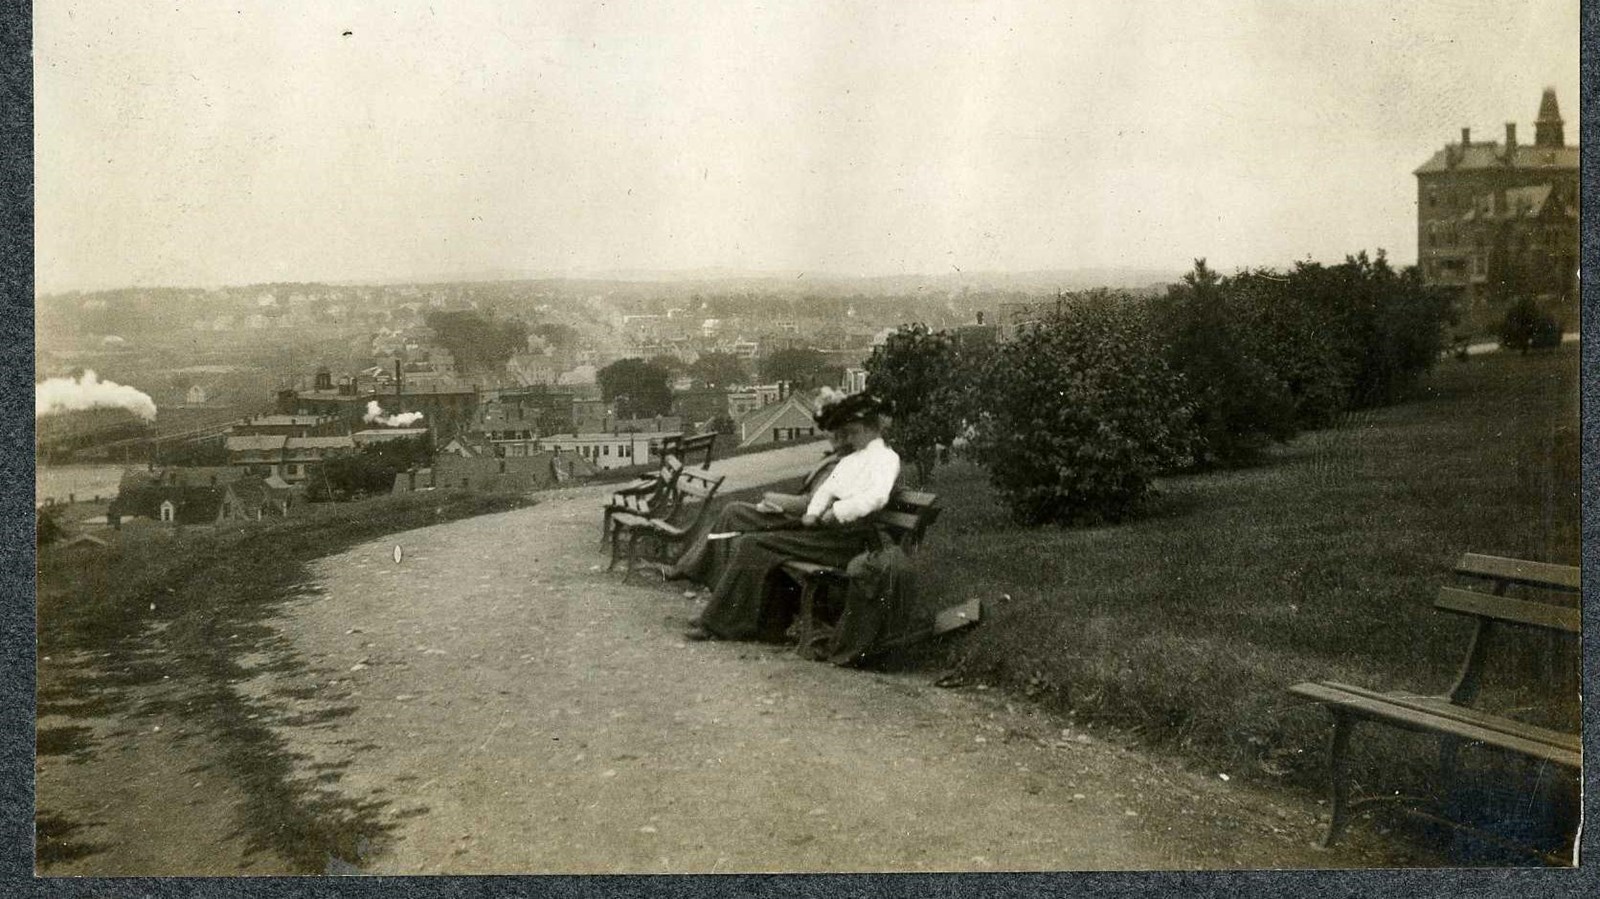 Black and white of dirt path on hill lined with benches and grass with some people sitting on bench